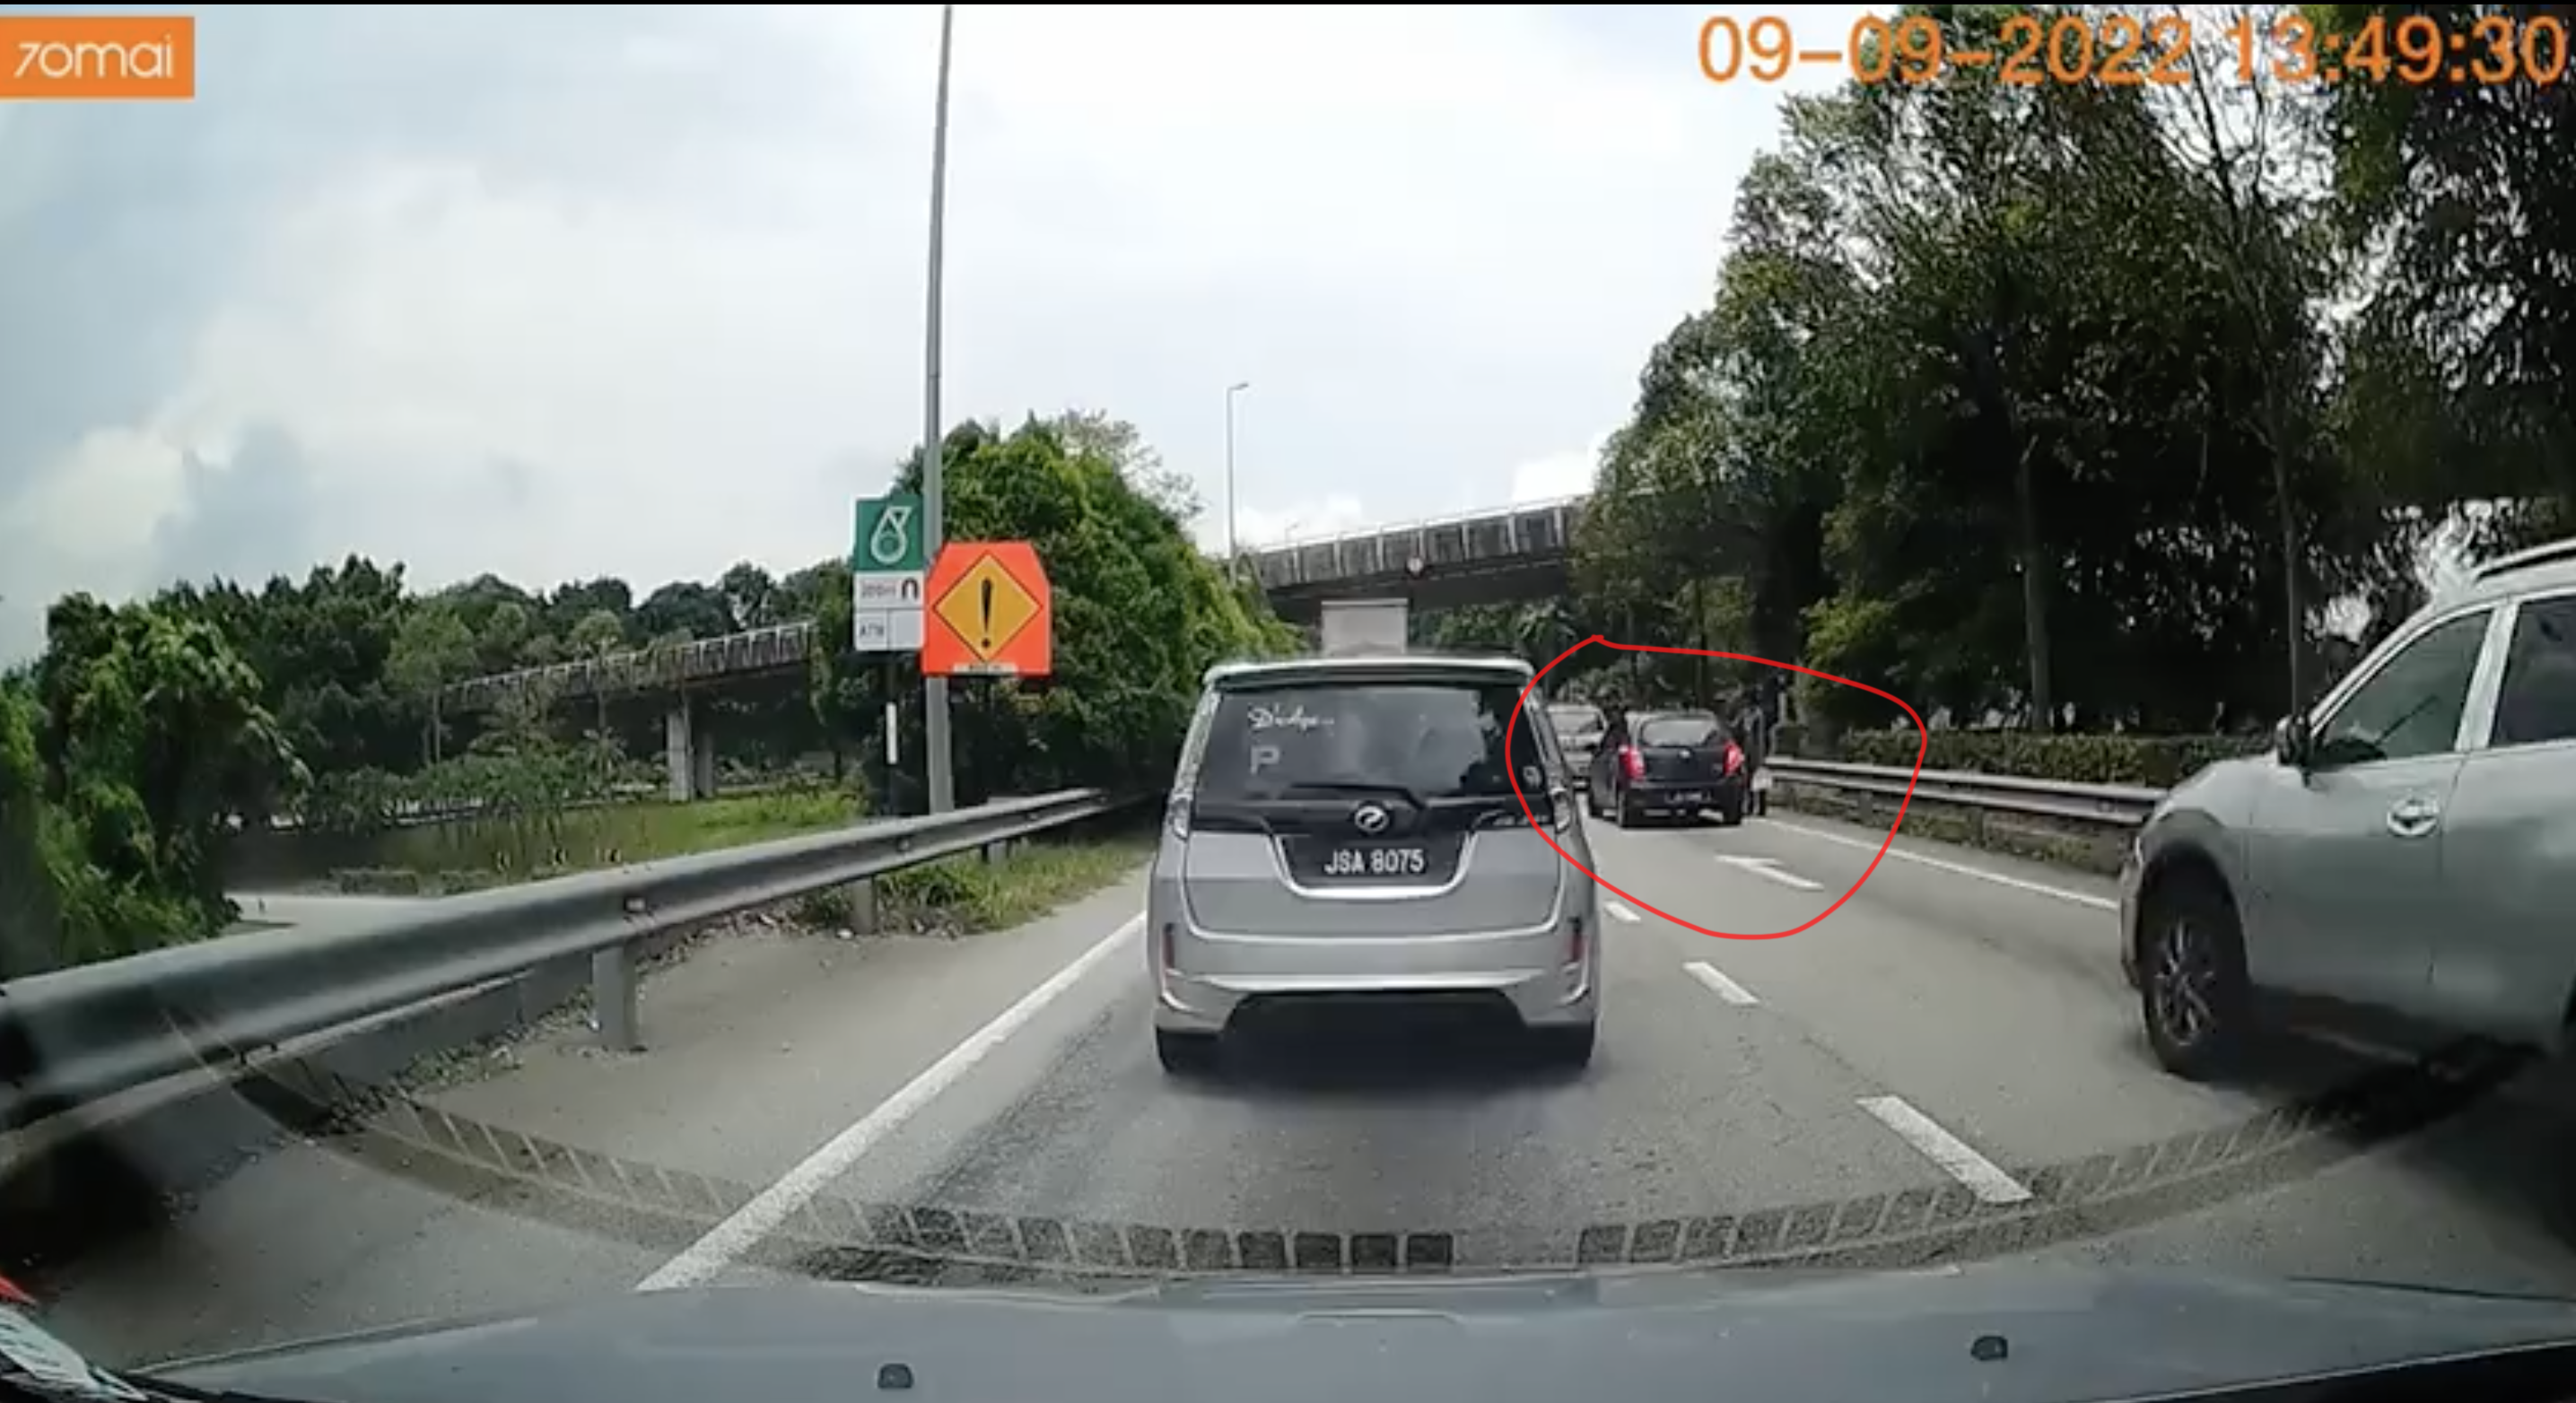 Perodua axia driver stops by roadside for pickled mango, causing hit and run accident | weirdkaya